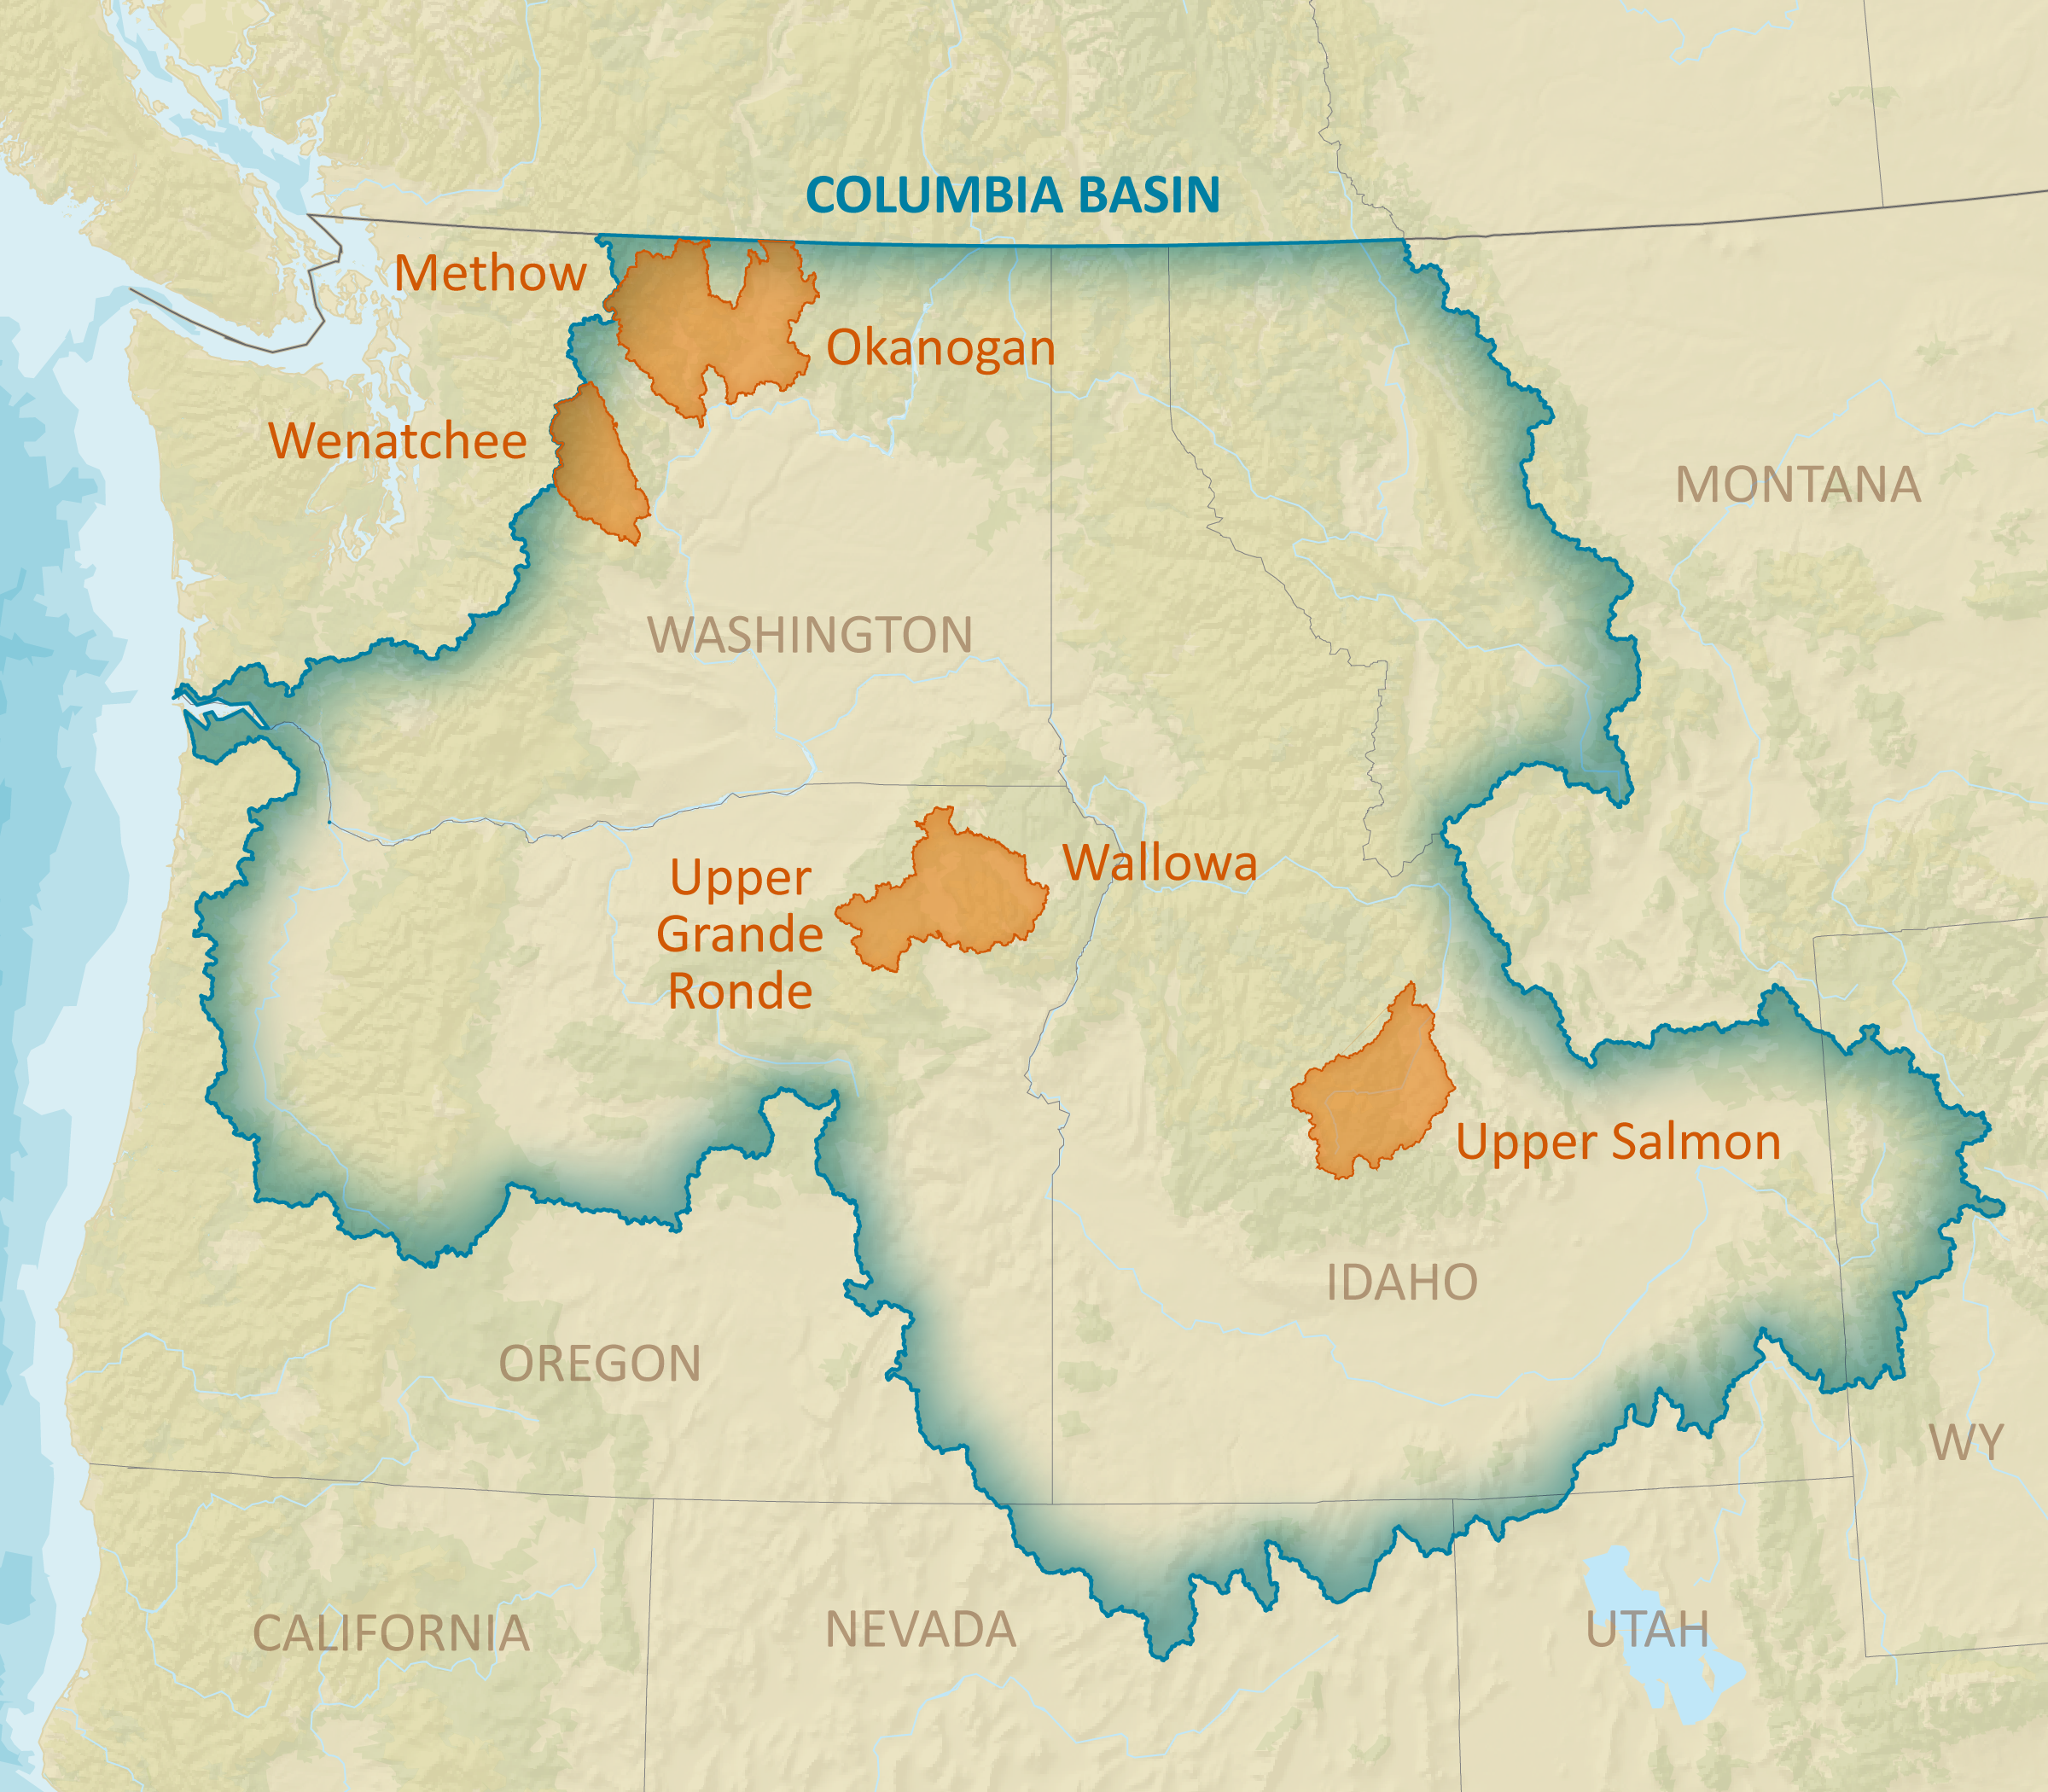 Columbia Basin with BiOp Identified Geographies